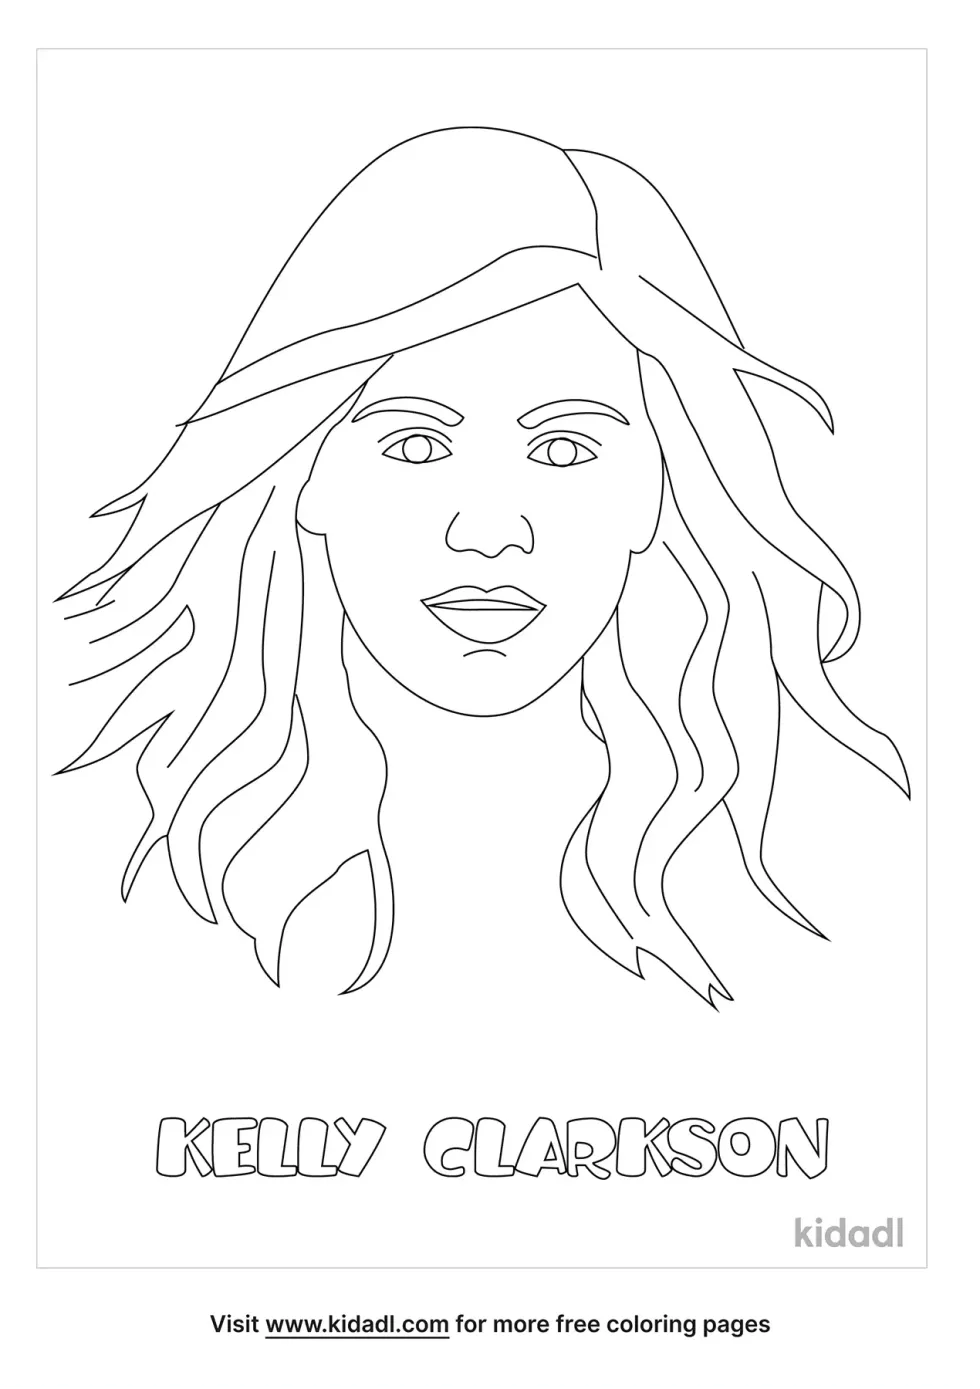 Kelly Clarkson Coloring Page